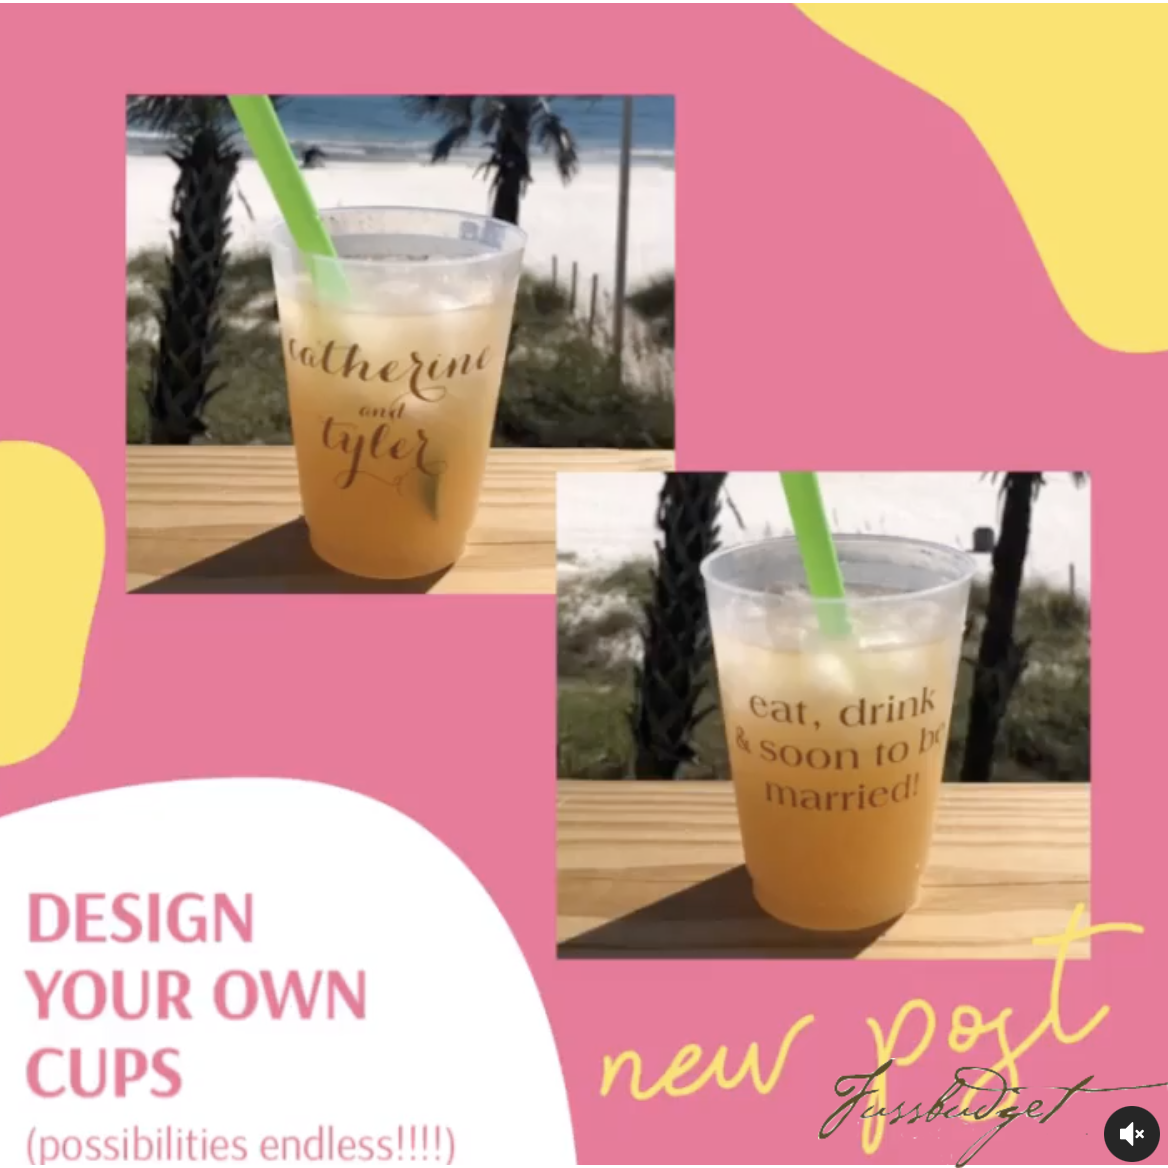 Smoothie cups printed with your logo!